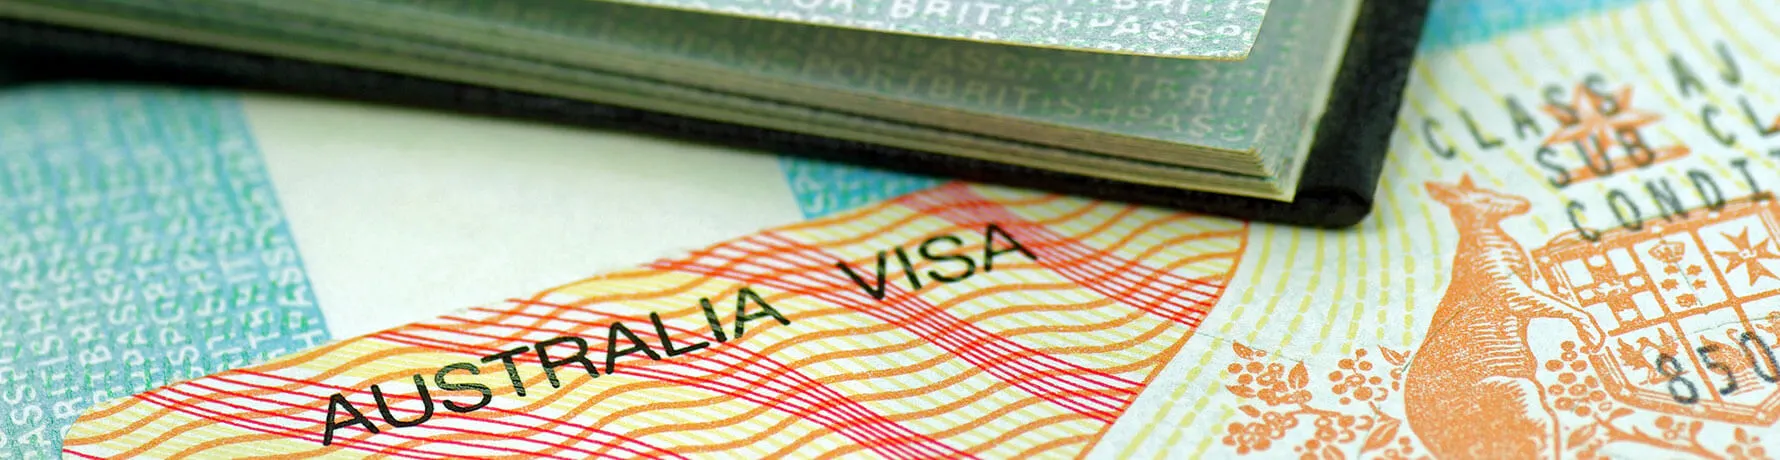 How to get your working holiday visa in Australia